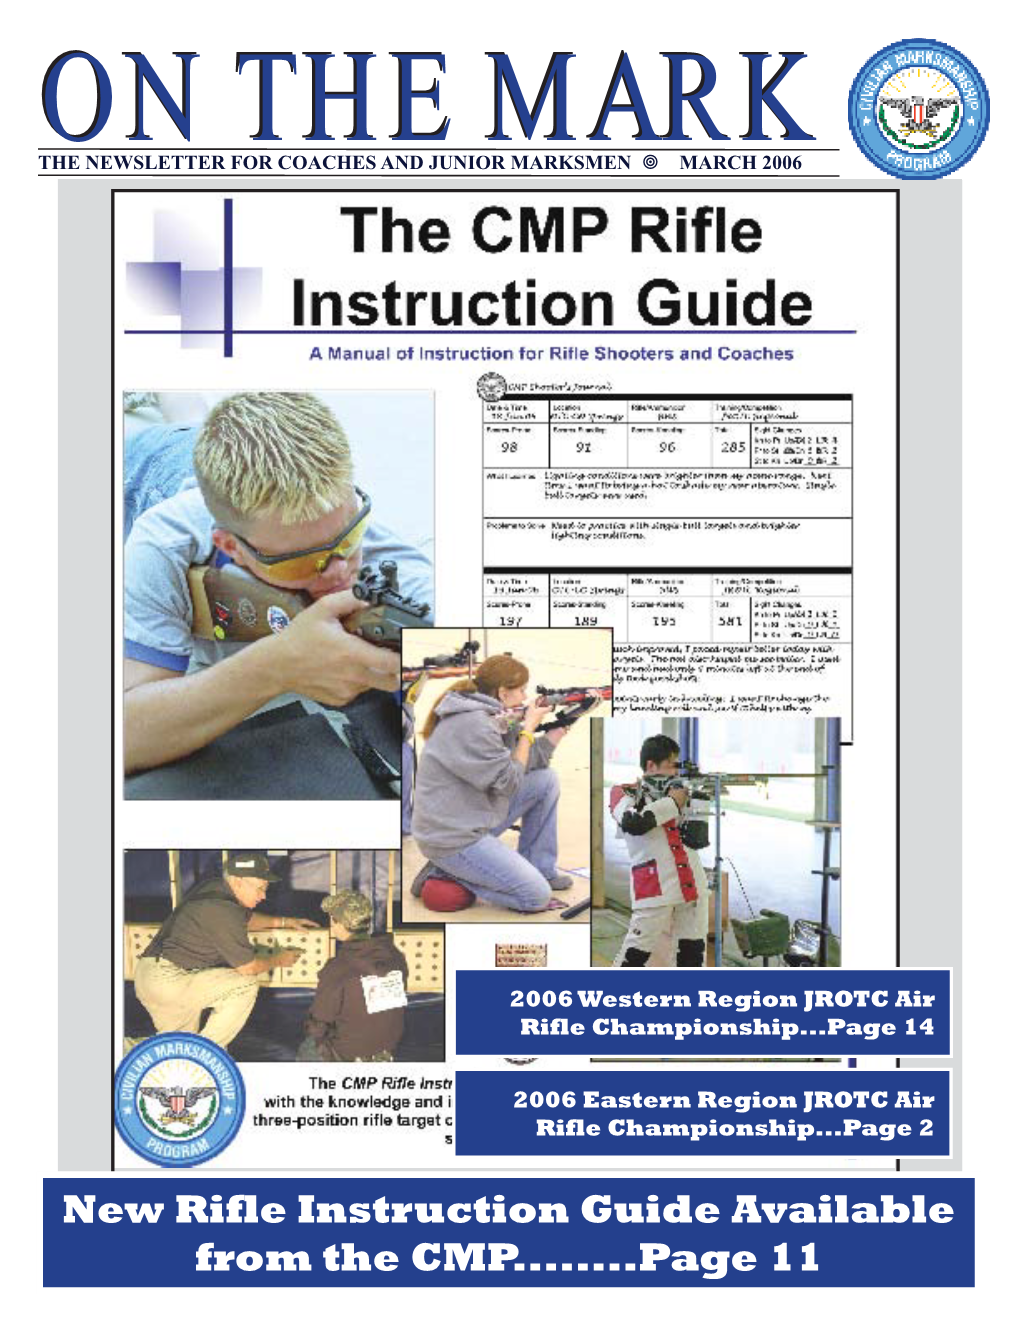 New Rifle Instruction Guide Available from the CMP...Page 11